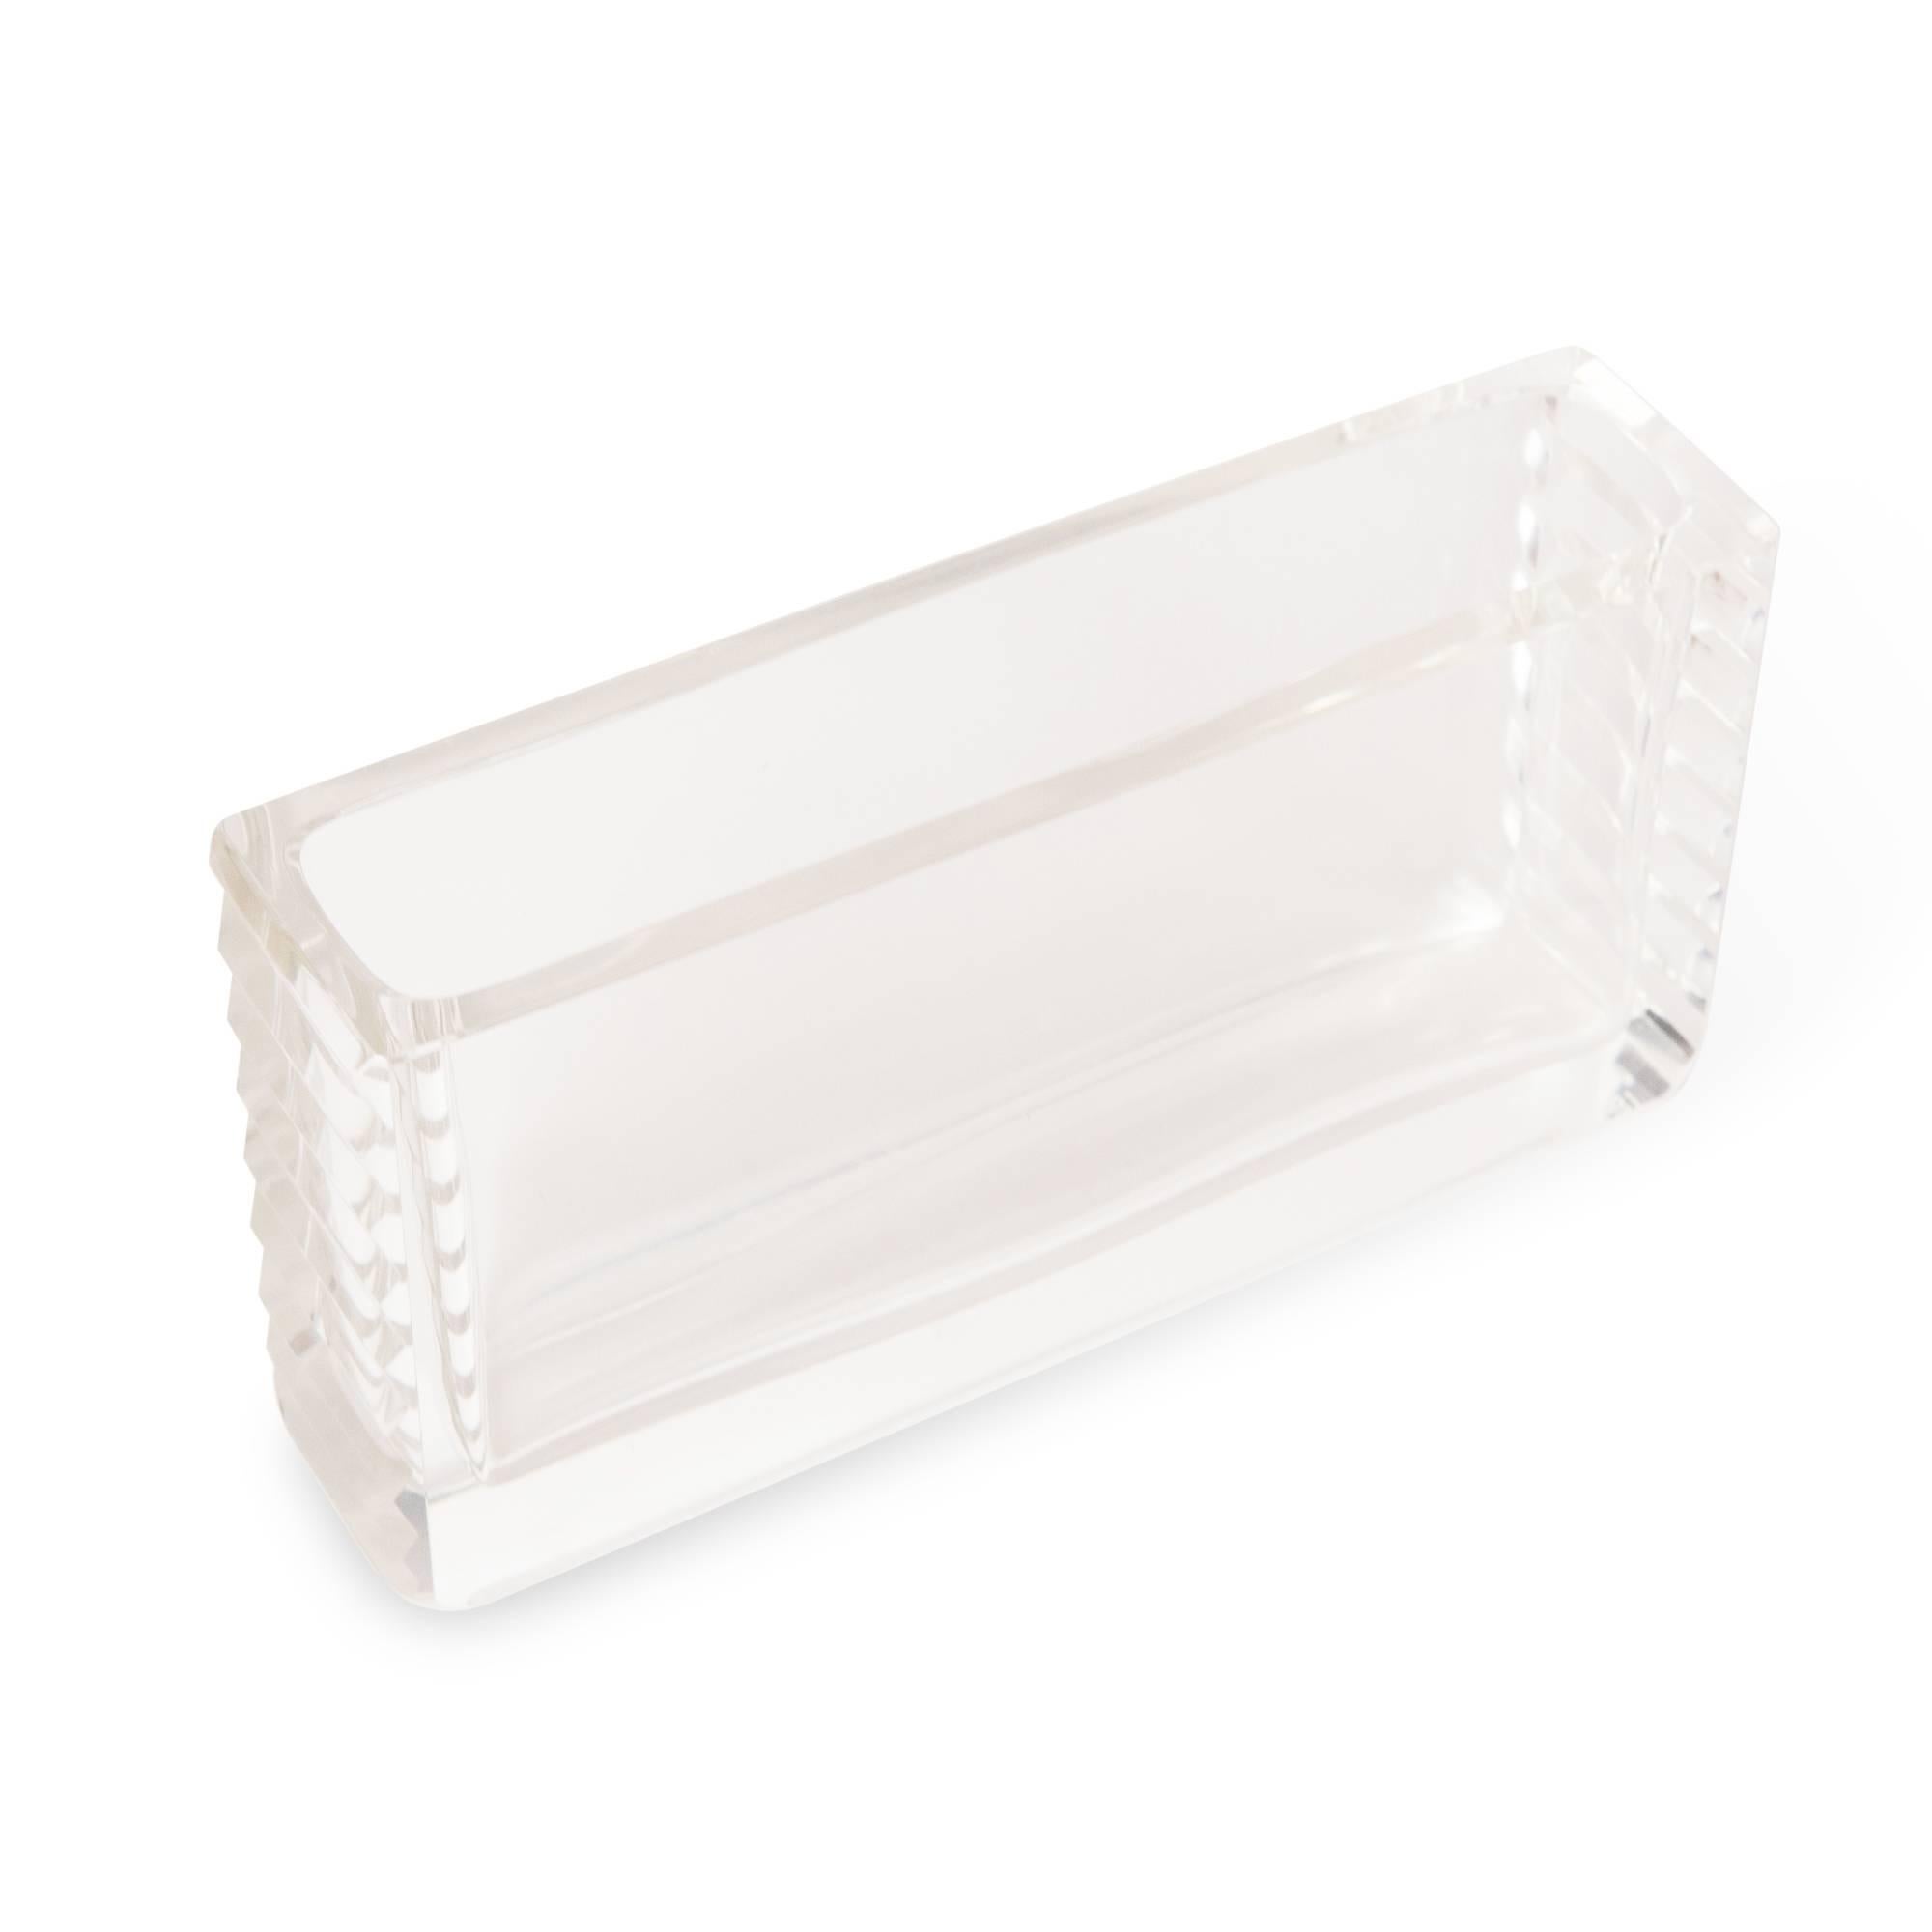 Narrow Clear Glass Rectangular Vase by Jean Luce, circa 1930 For Sale 1